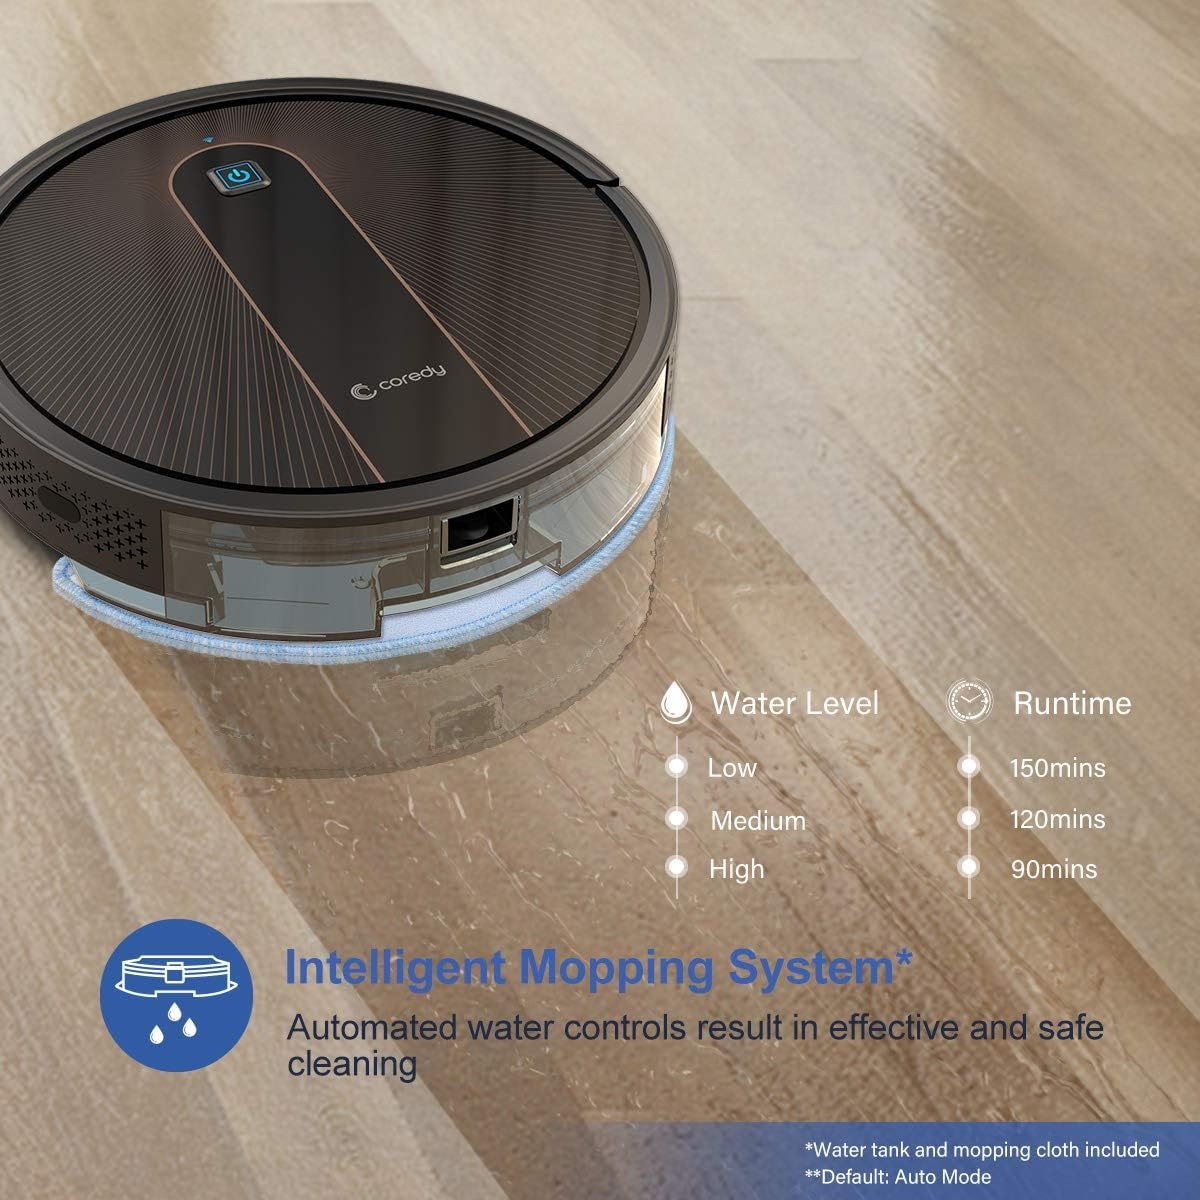 Coredy R700 Robot Vacuum Cleaner, Compatible with Alexa, Boost Intellect, Virtual Boundary Supported, 1600Pa Max Suction, Ultra Slim, All-New Upgraded Robotic Vacuums, Cleans Hard Floor to Carpet